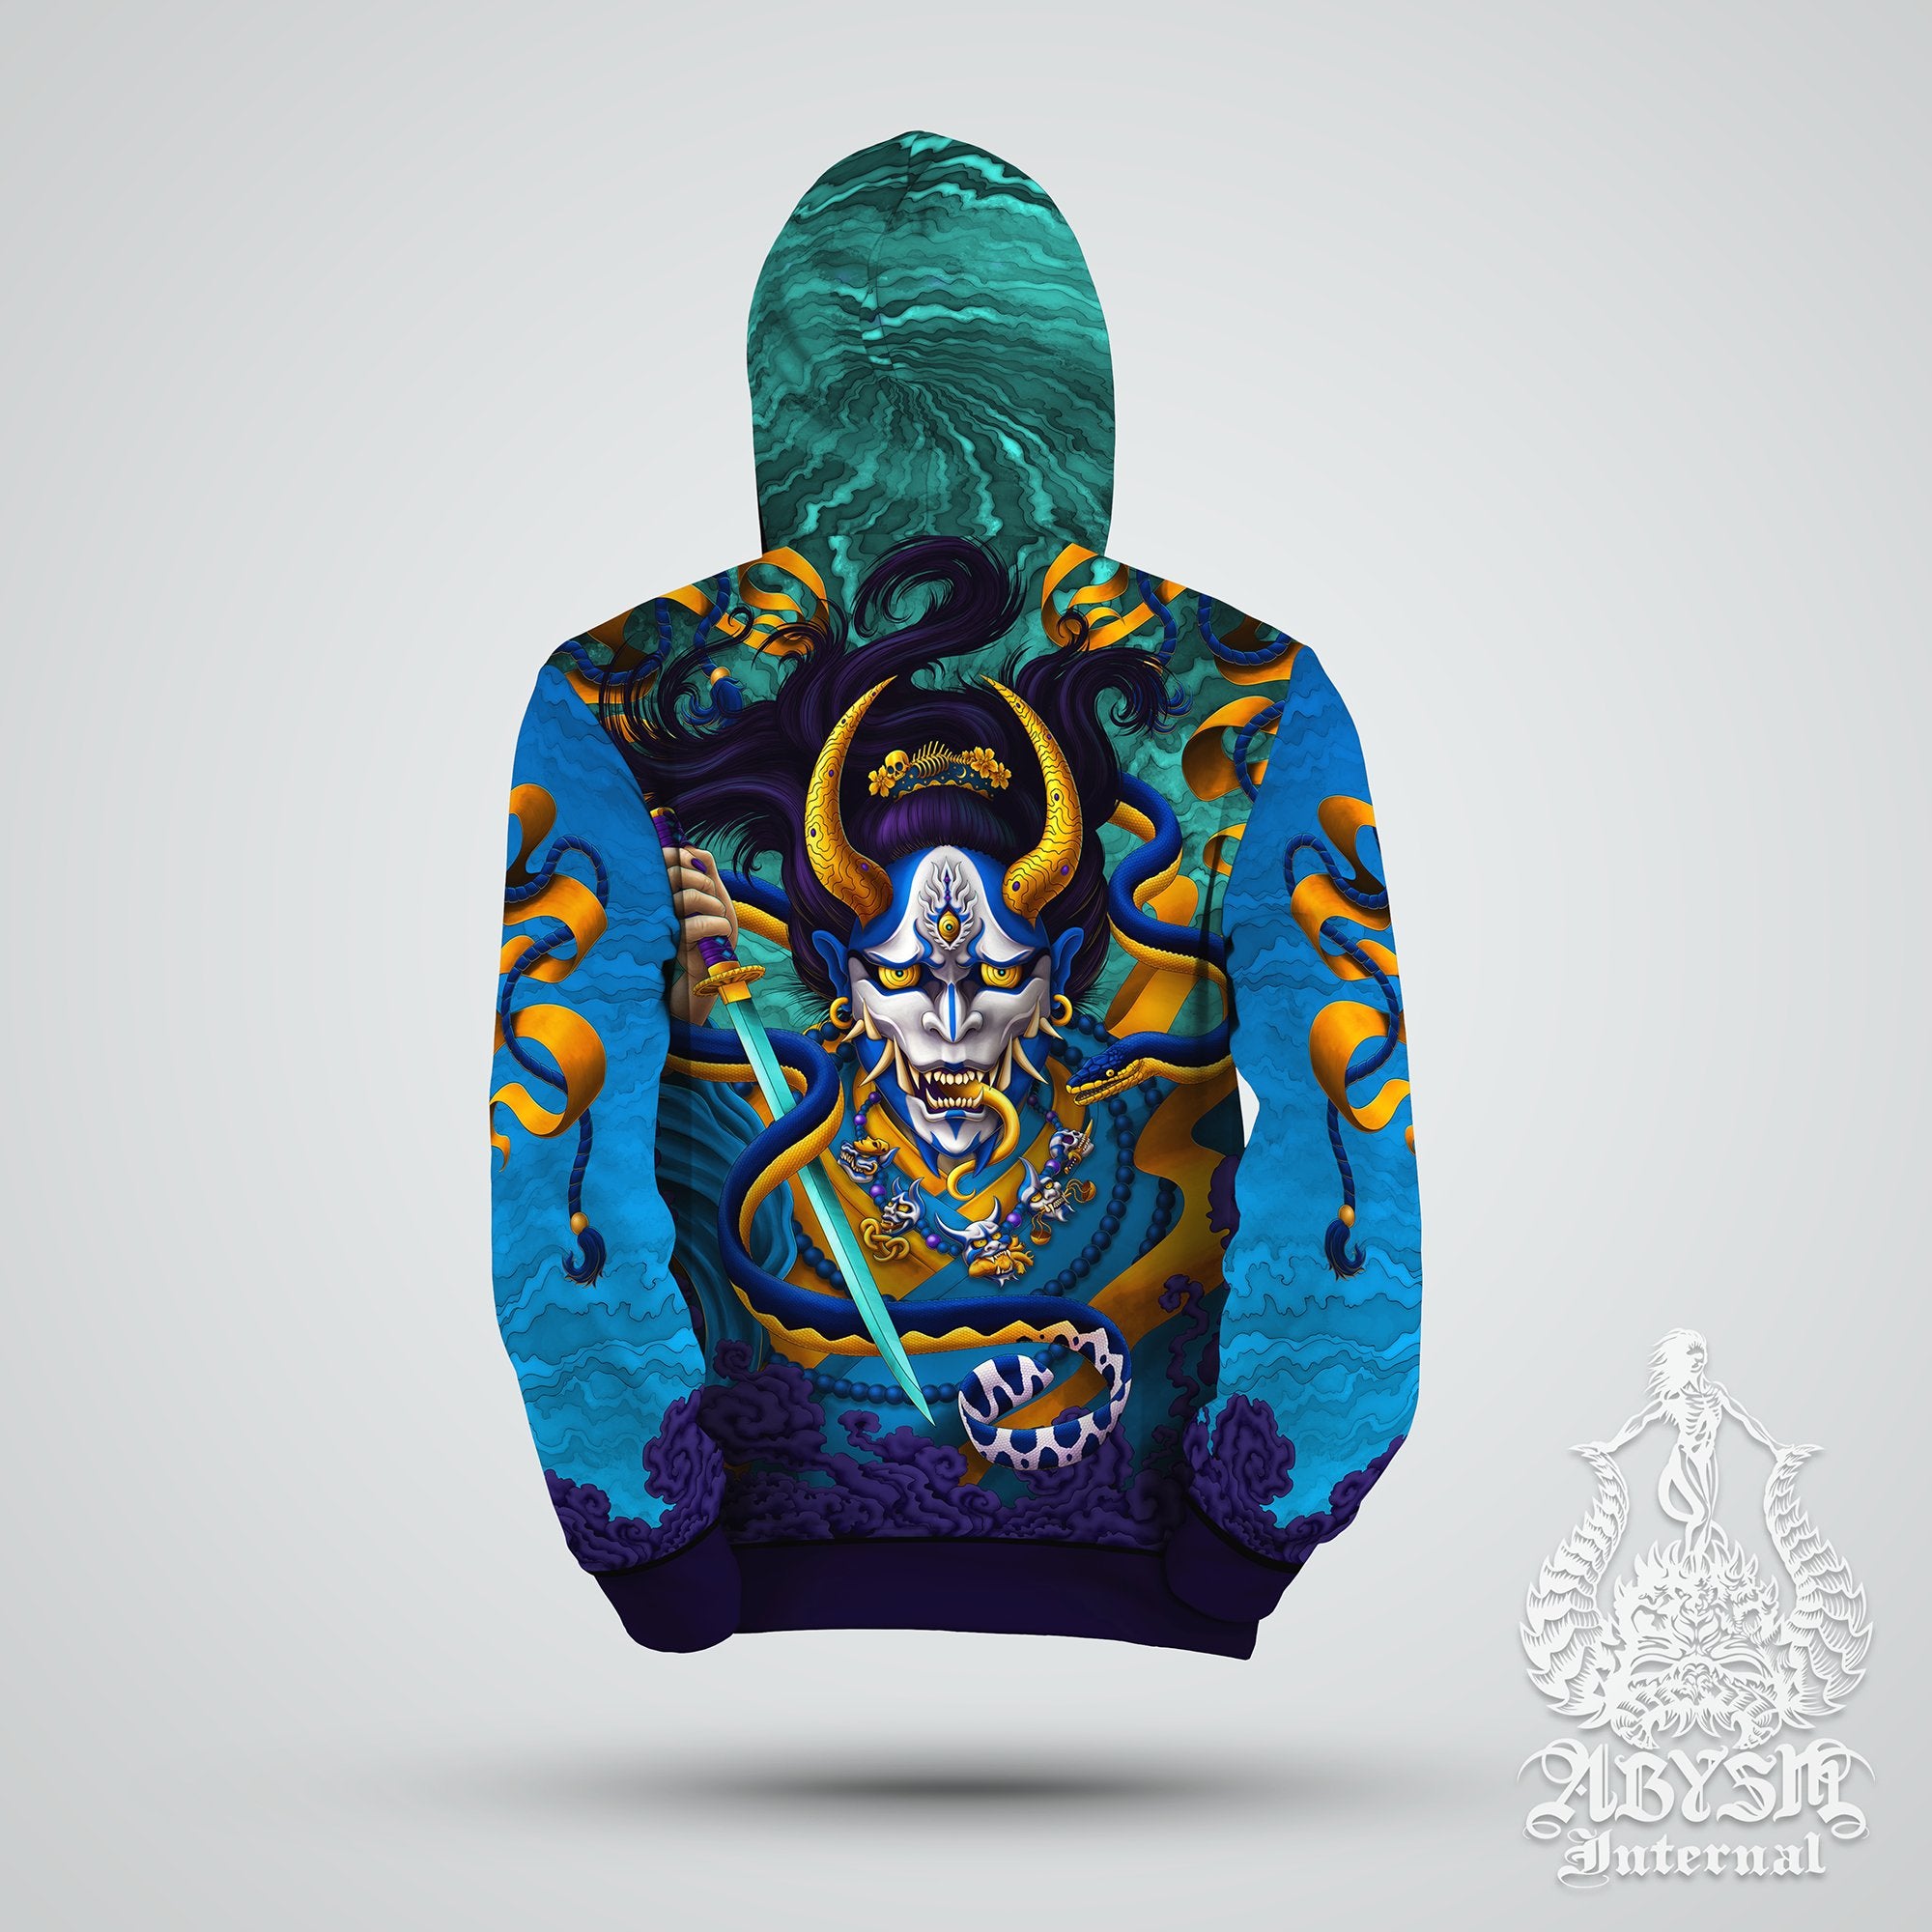 Parkour Hoodie, Japanese Demon Sweater, Manga and Anime Streetwear, Fantasy Street Outfit, Hannya Pullover, Alternative Clothing, Unisex - Oni and Snake, Cyan Gold - Abysm Internal